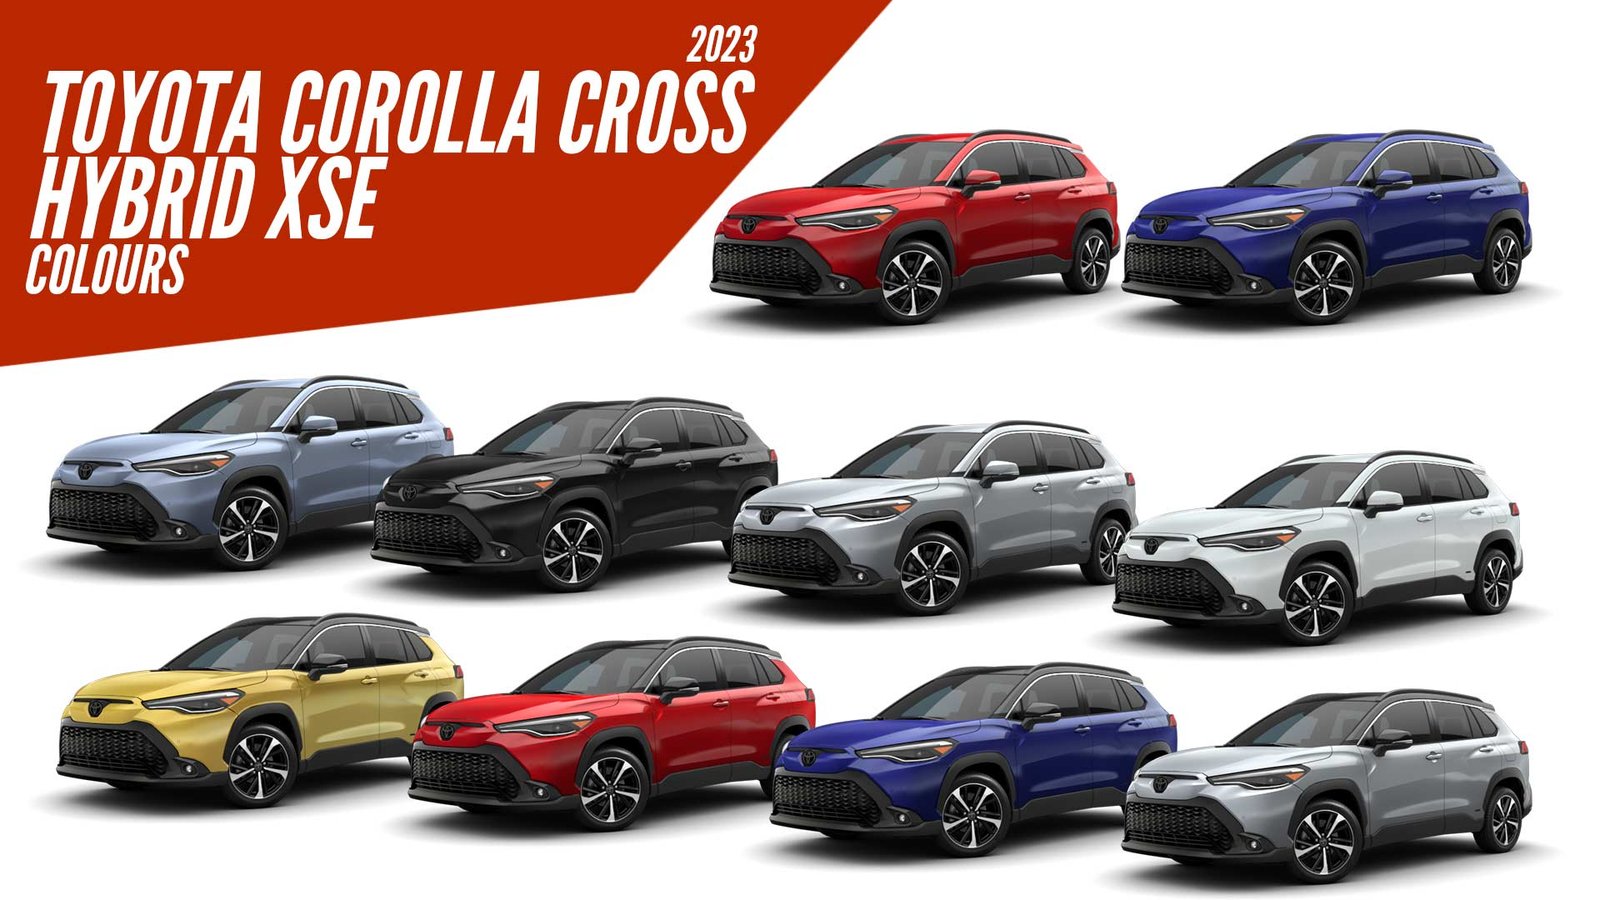 2023 Toyota Corolla Cross Hybrid XSE All Color Options Images